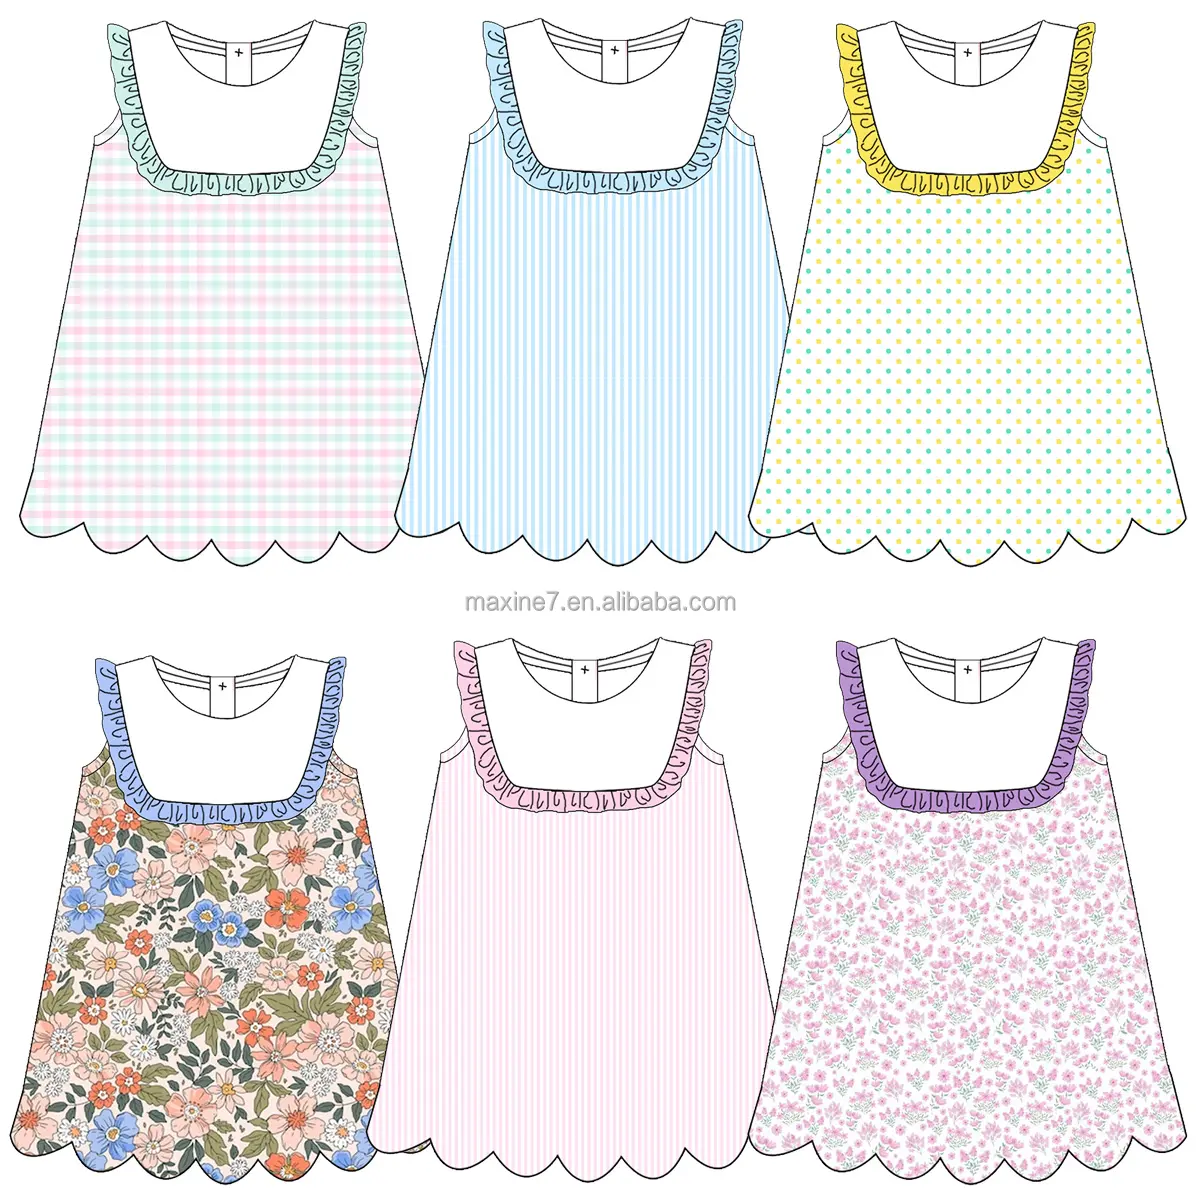 Puresun custom designs spring floral prints kids clothes ruffles french knot boutique baby cotton dress for girls